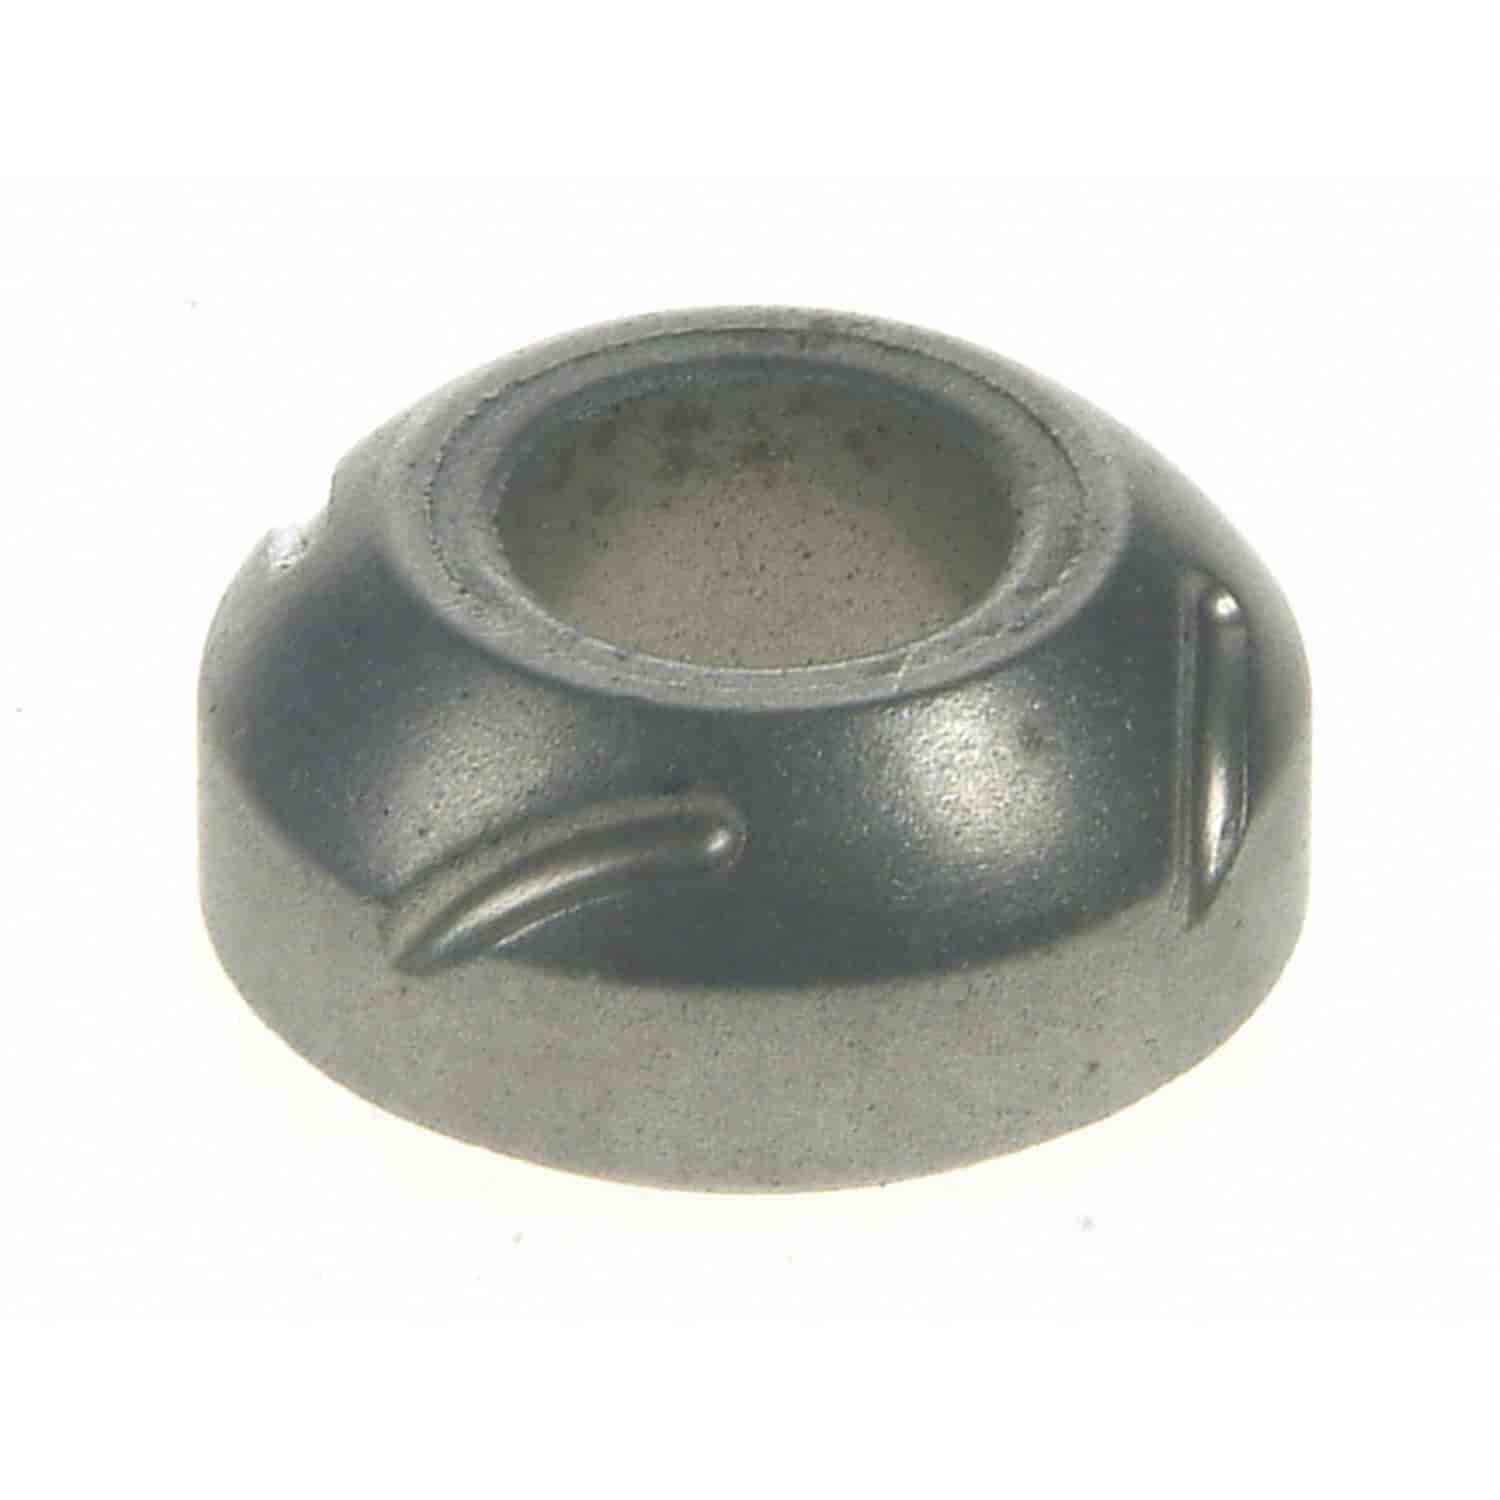 Rocker Arm Pivot Ball for Chevy Small Block Engines